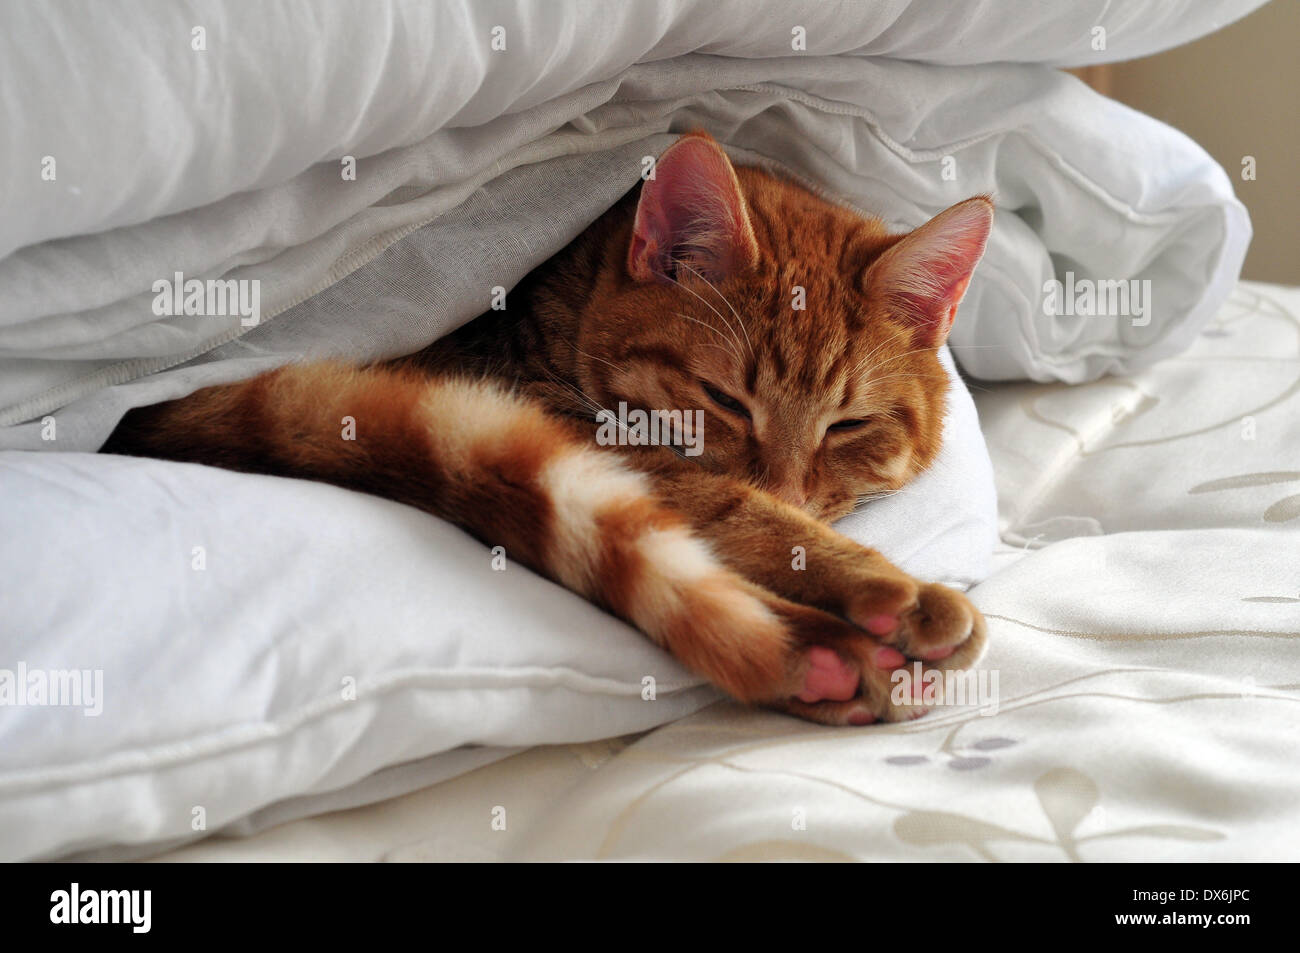 Aberystwyth, Wales, UK - Samson, a one year old ginger cat, has found the perfect spot for a cat-nap. He has sneaked in and is tucked into the clean bedding of the guest room... - 19- Mar-2014, Photo Credit: John Gilbey/Alamy Live News. Stock Photo